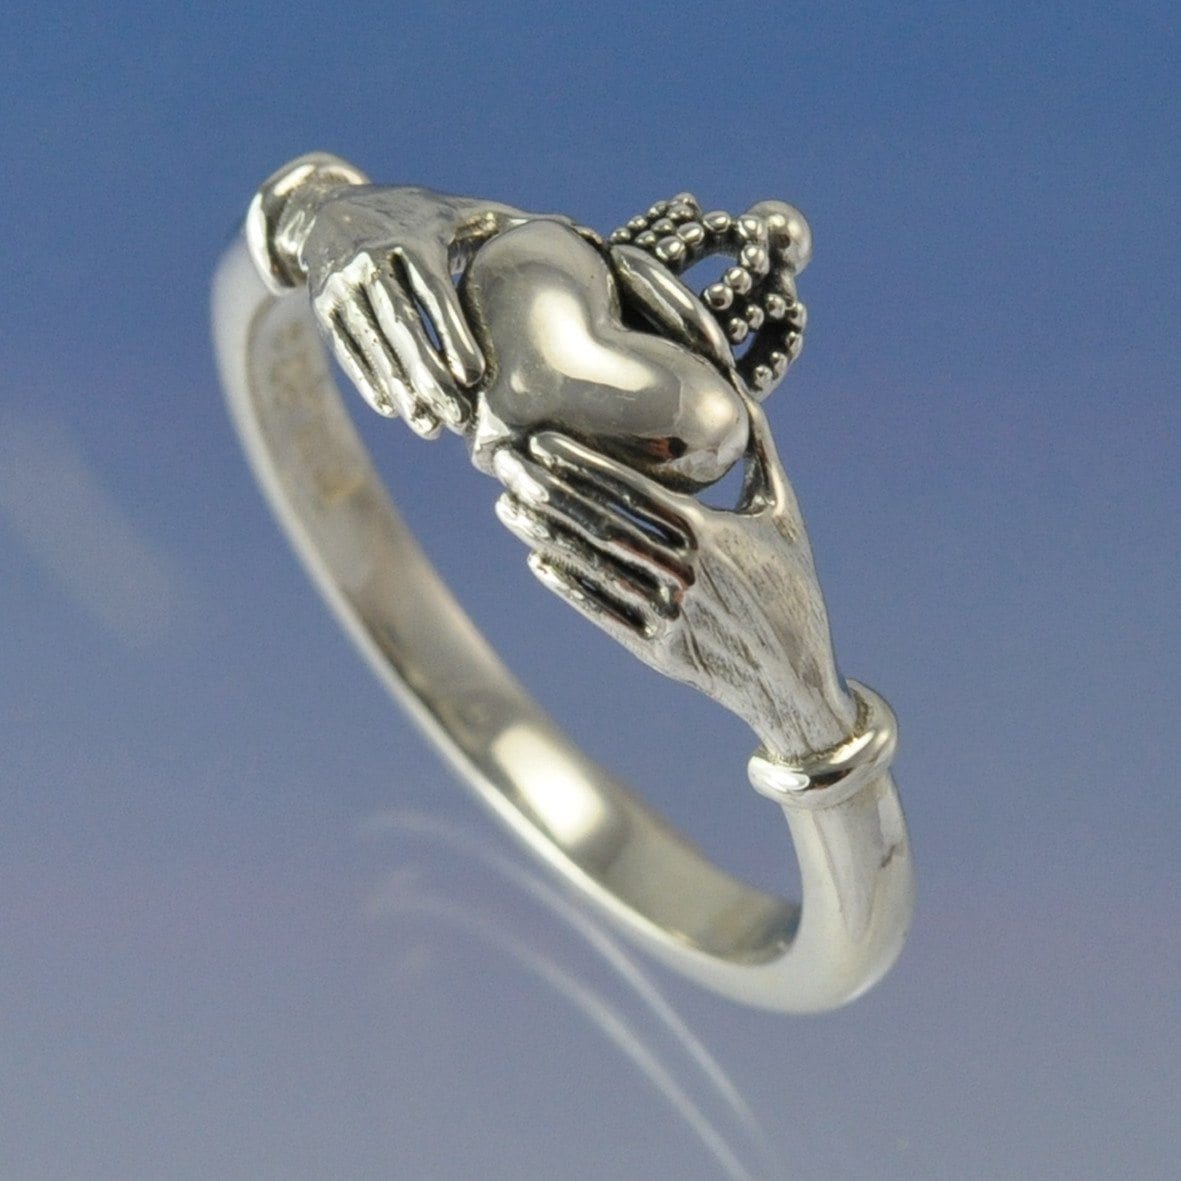 chris parry handmade ring cremation ash claddagh ring 23977602186